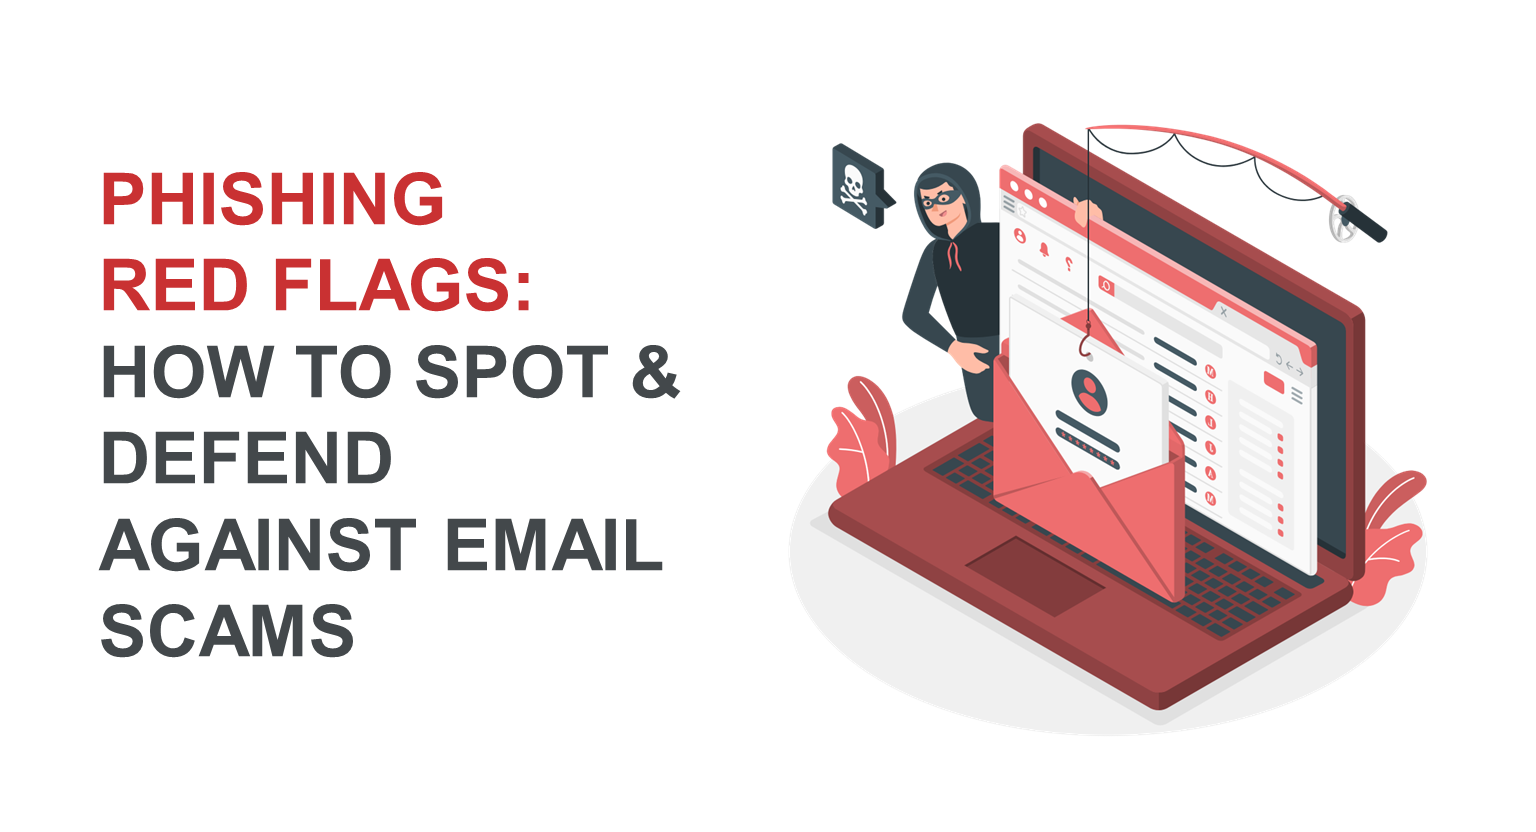 Phishing Red Flags: How to Spot and Defend Against Email Scams 